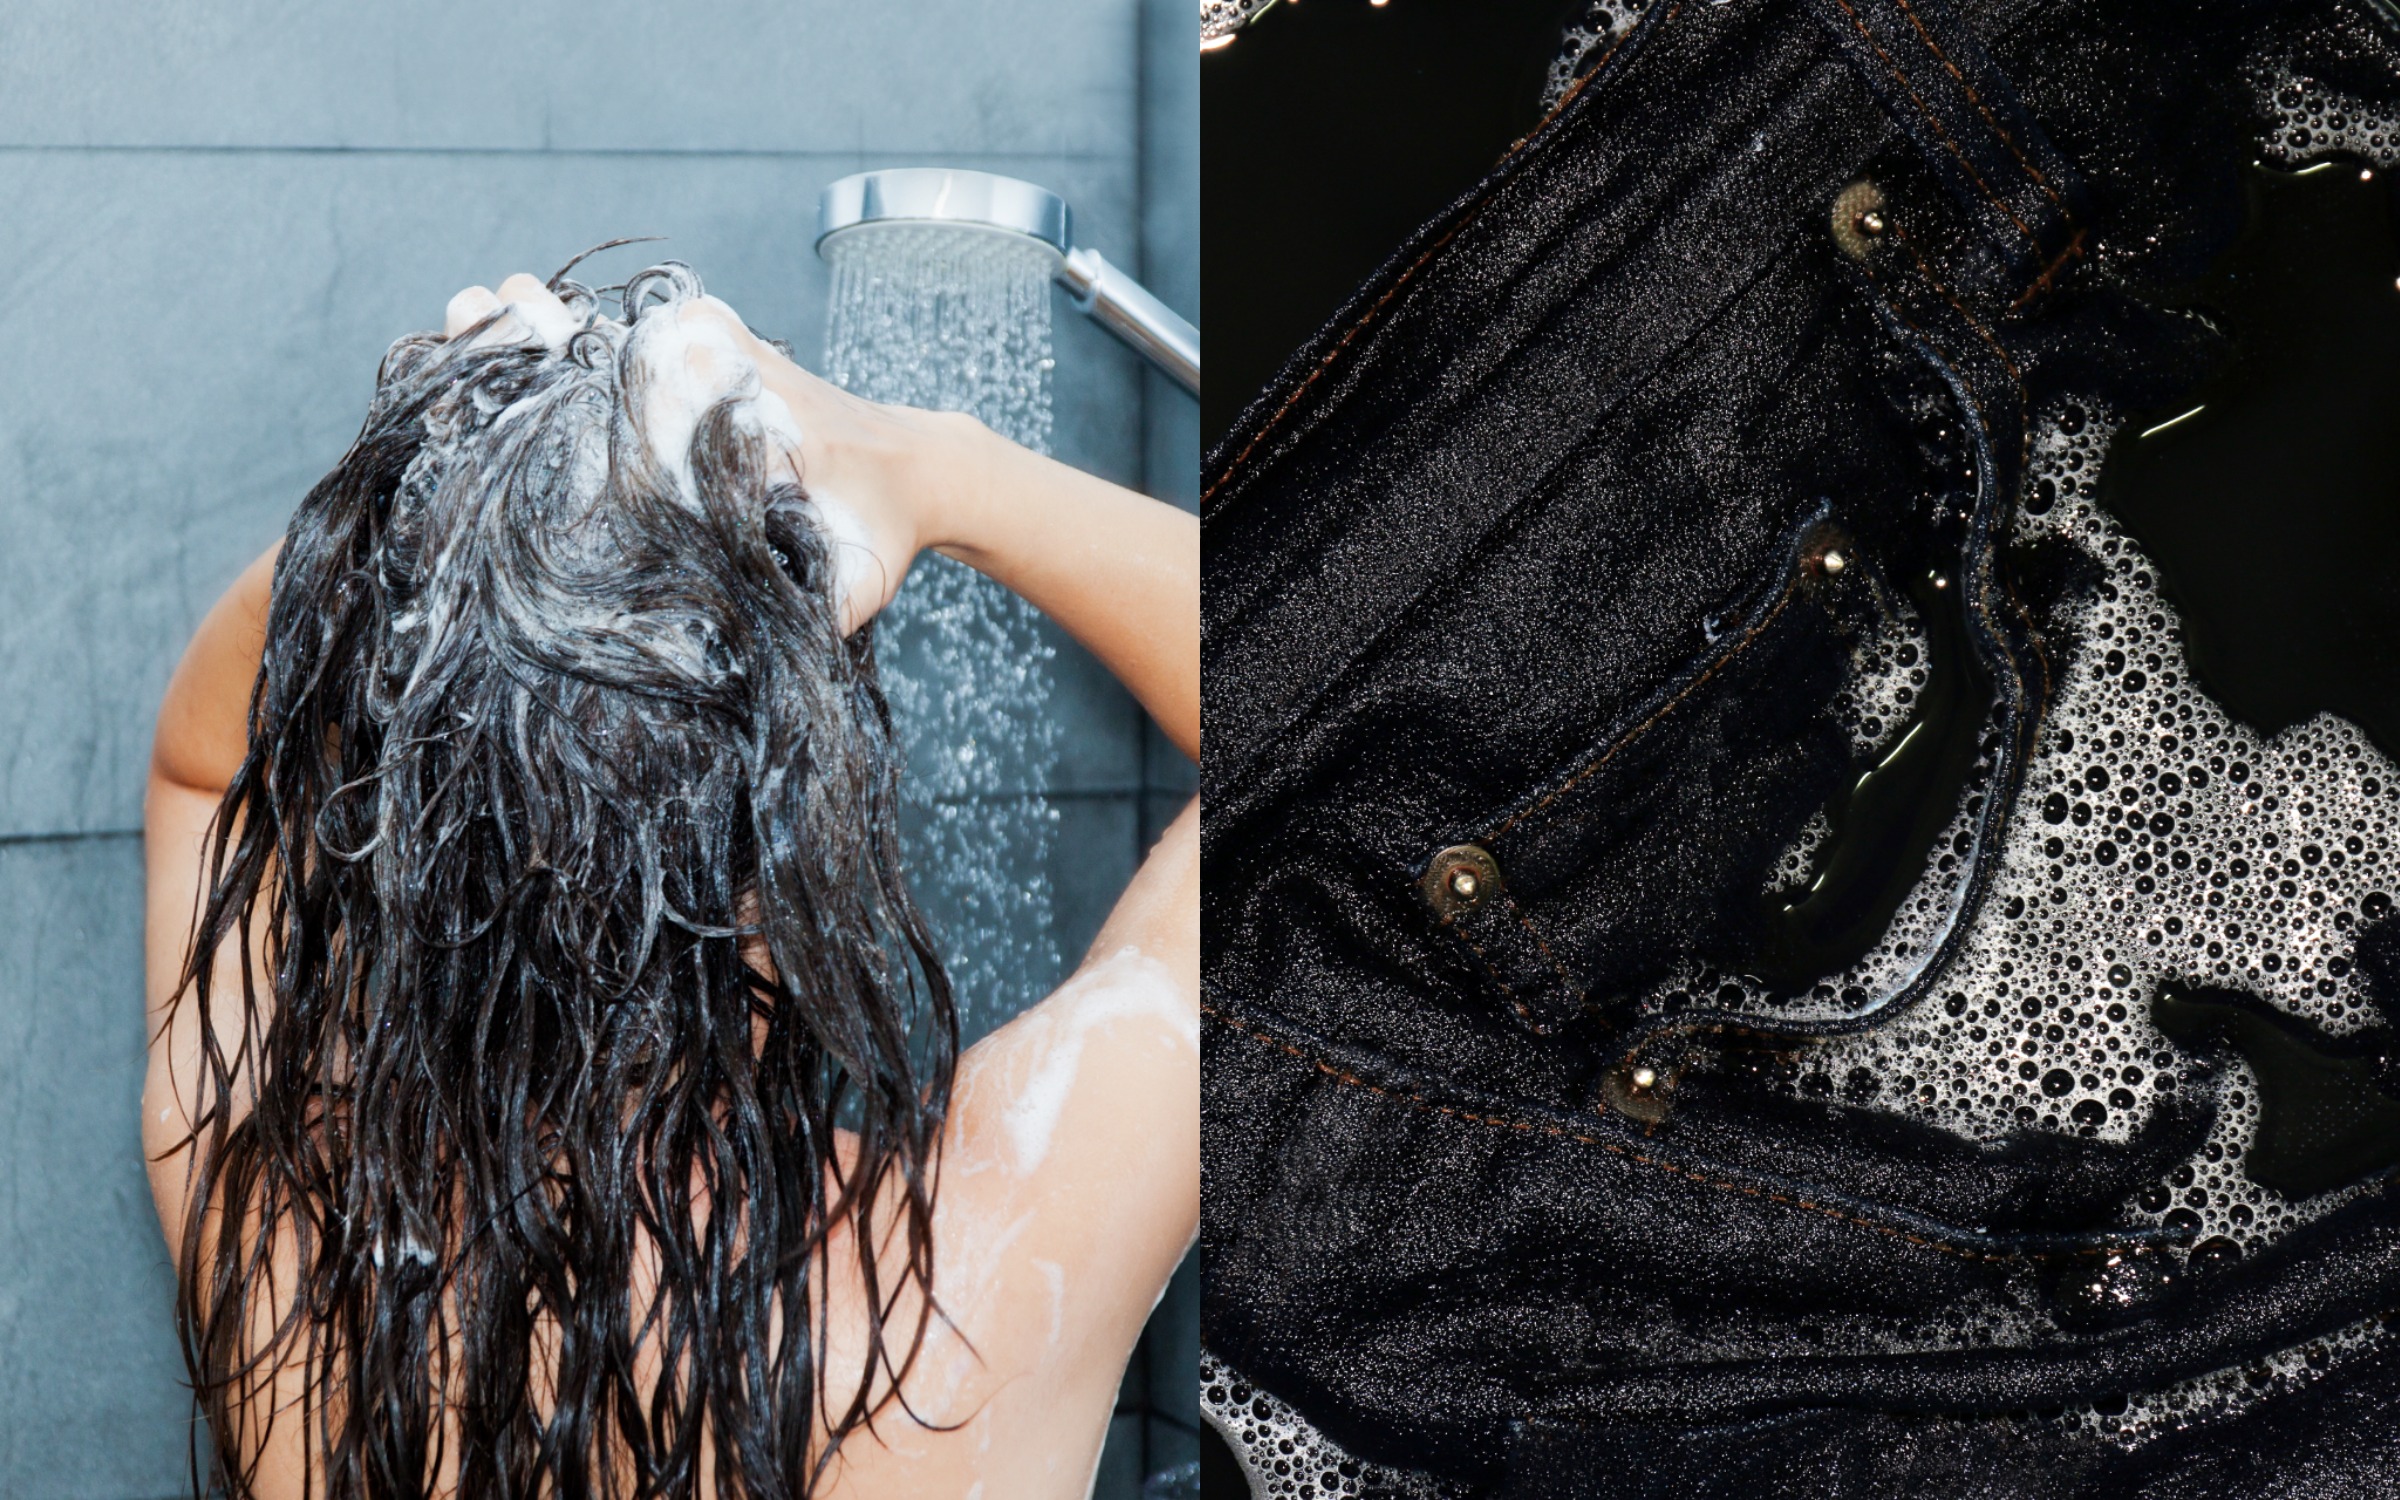 Why Are People Showering in Their Jeans? 'Hack of the Year' Explained